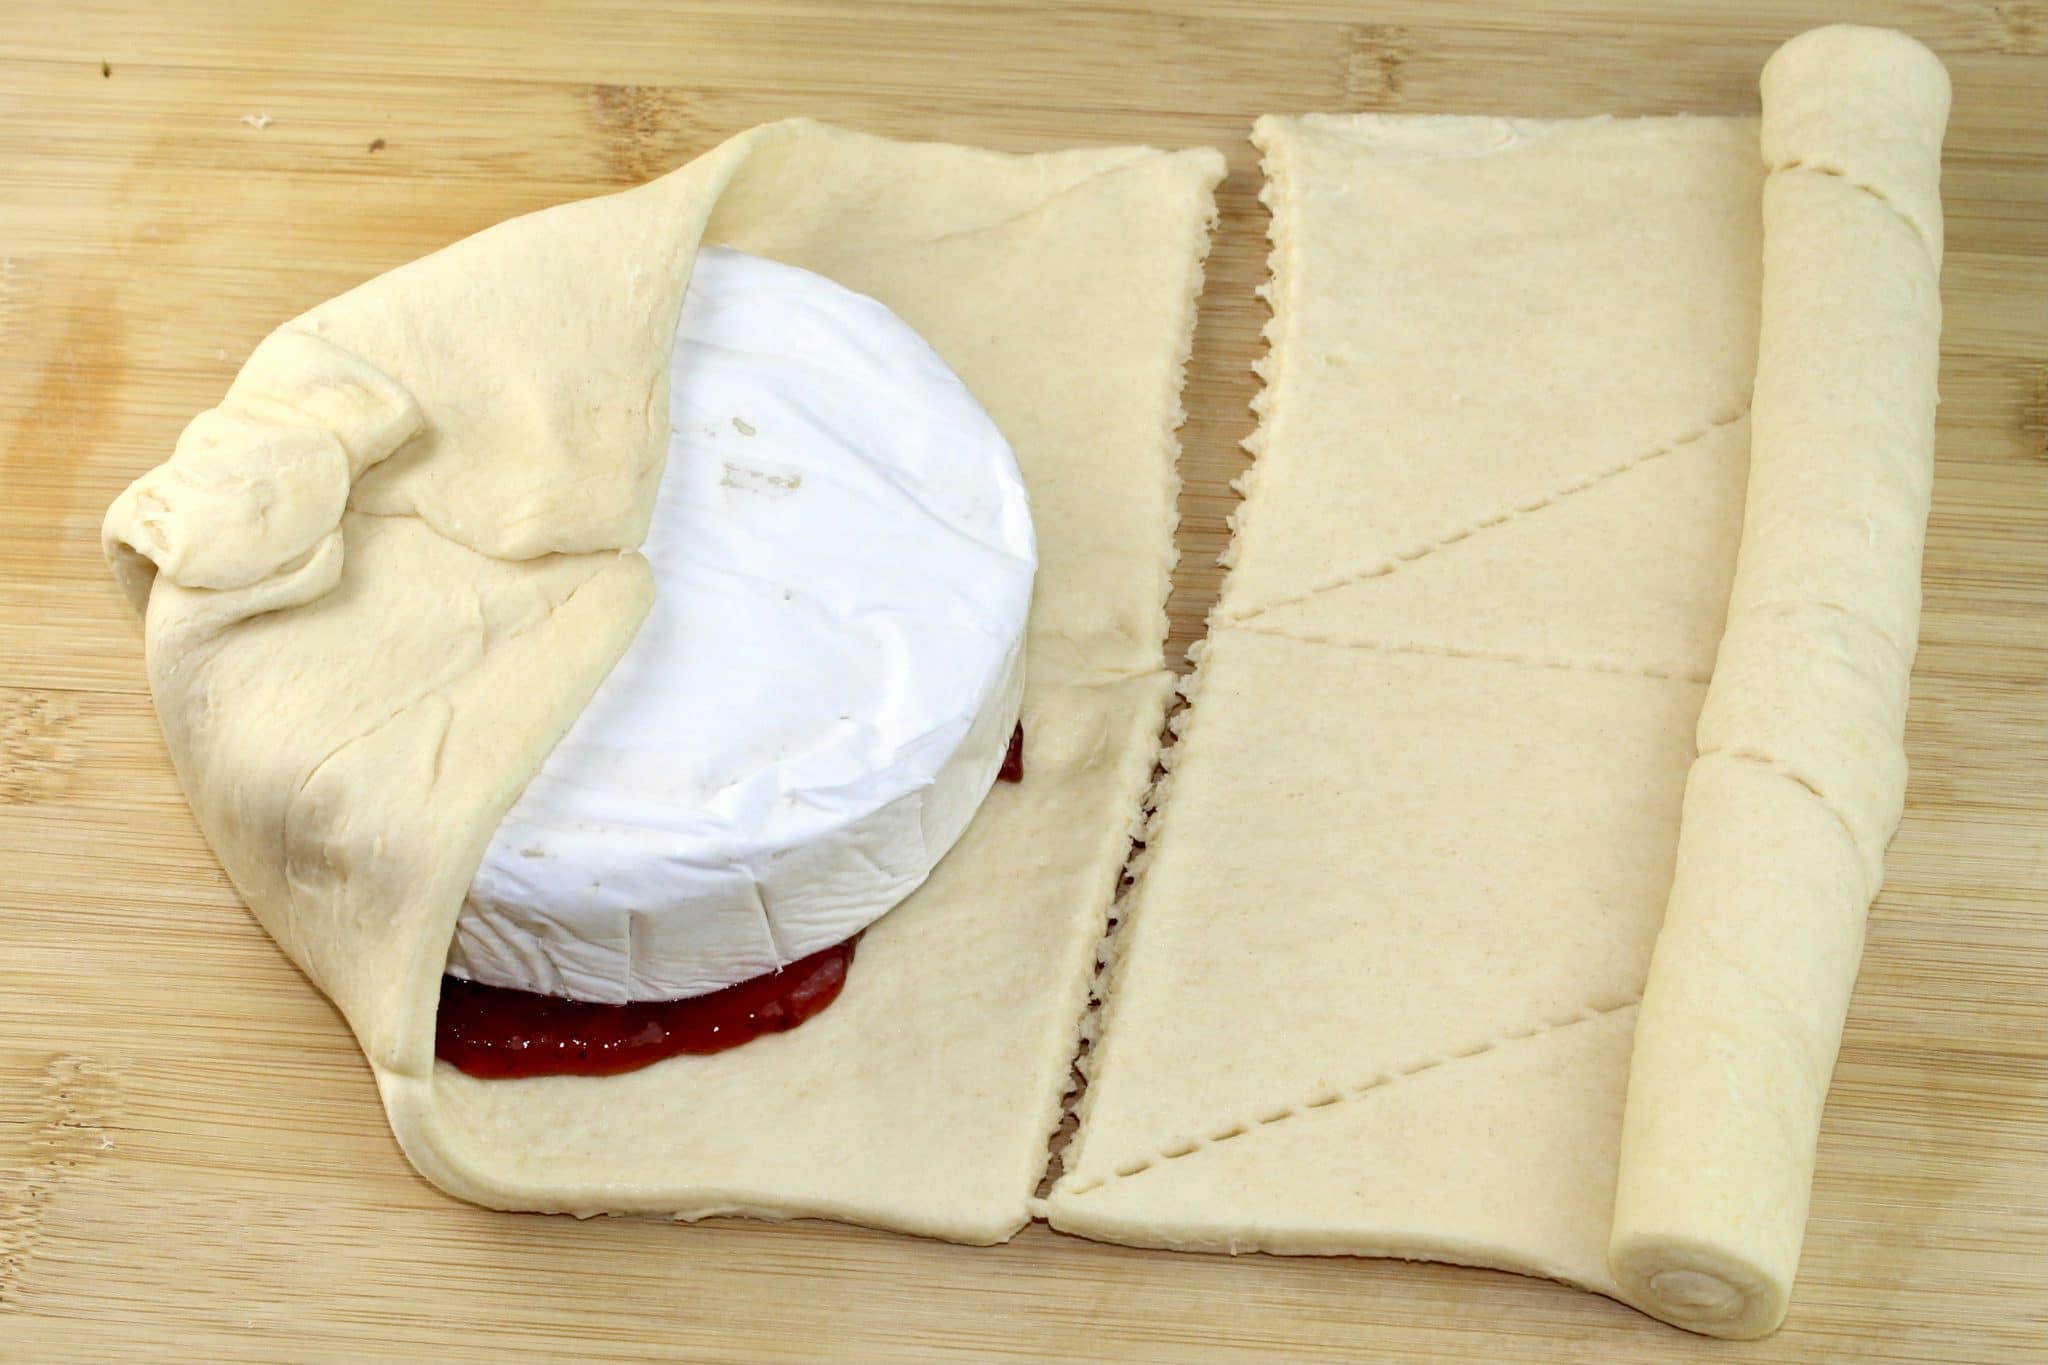 brie placed on preserves and dough is folded around it.